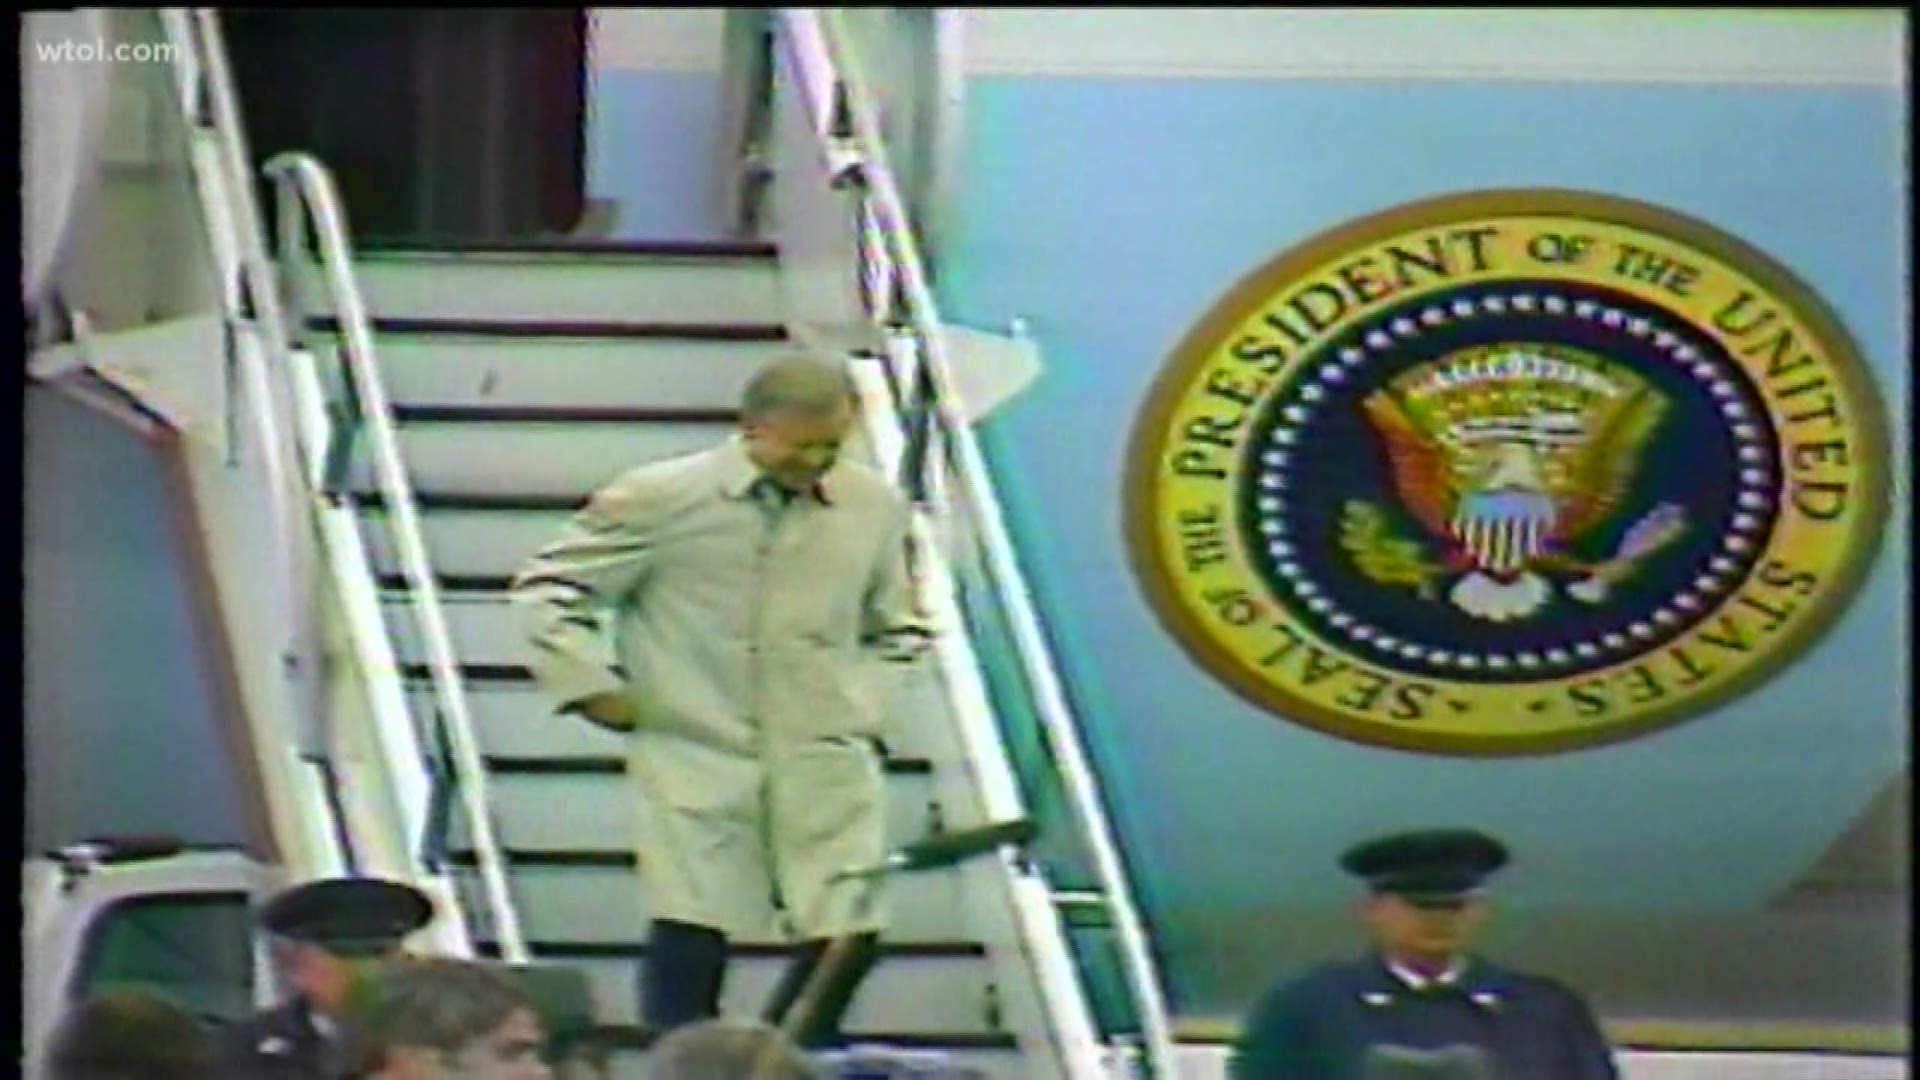 This isn't the first time a sitting president has visited Toledo. Here is a look at who has been here before.